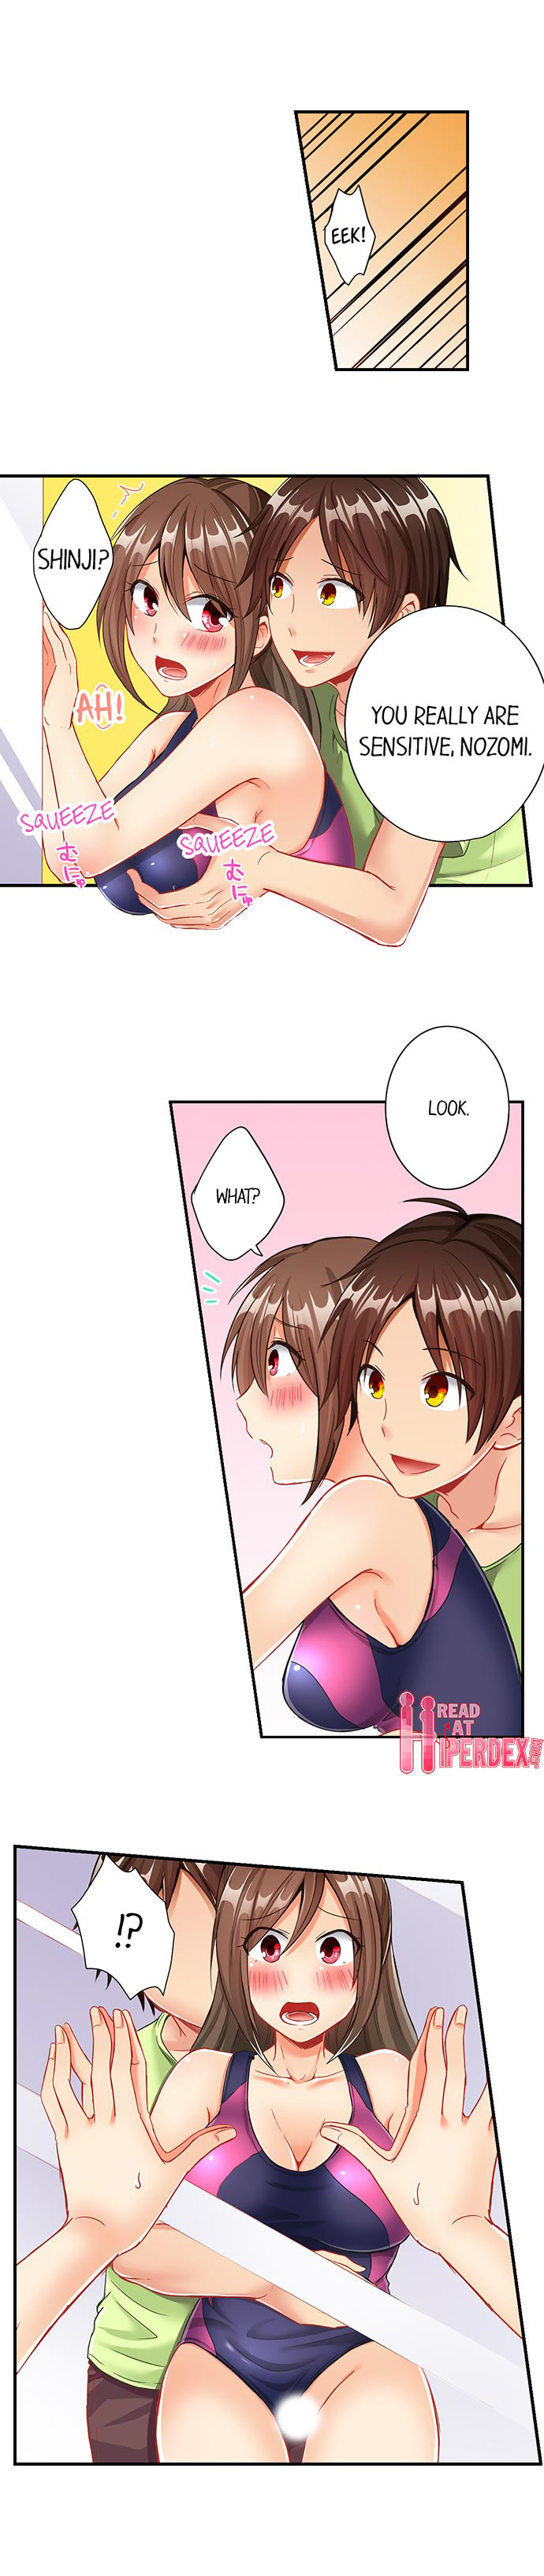 80% of the Swimming Club Girls Are Shaved - Chapter 8 Page 4